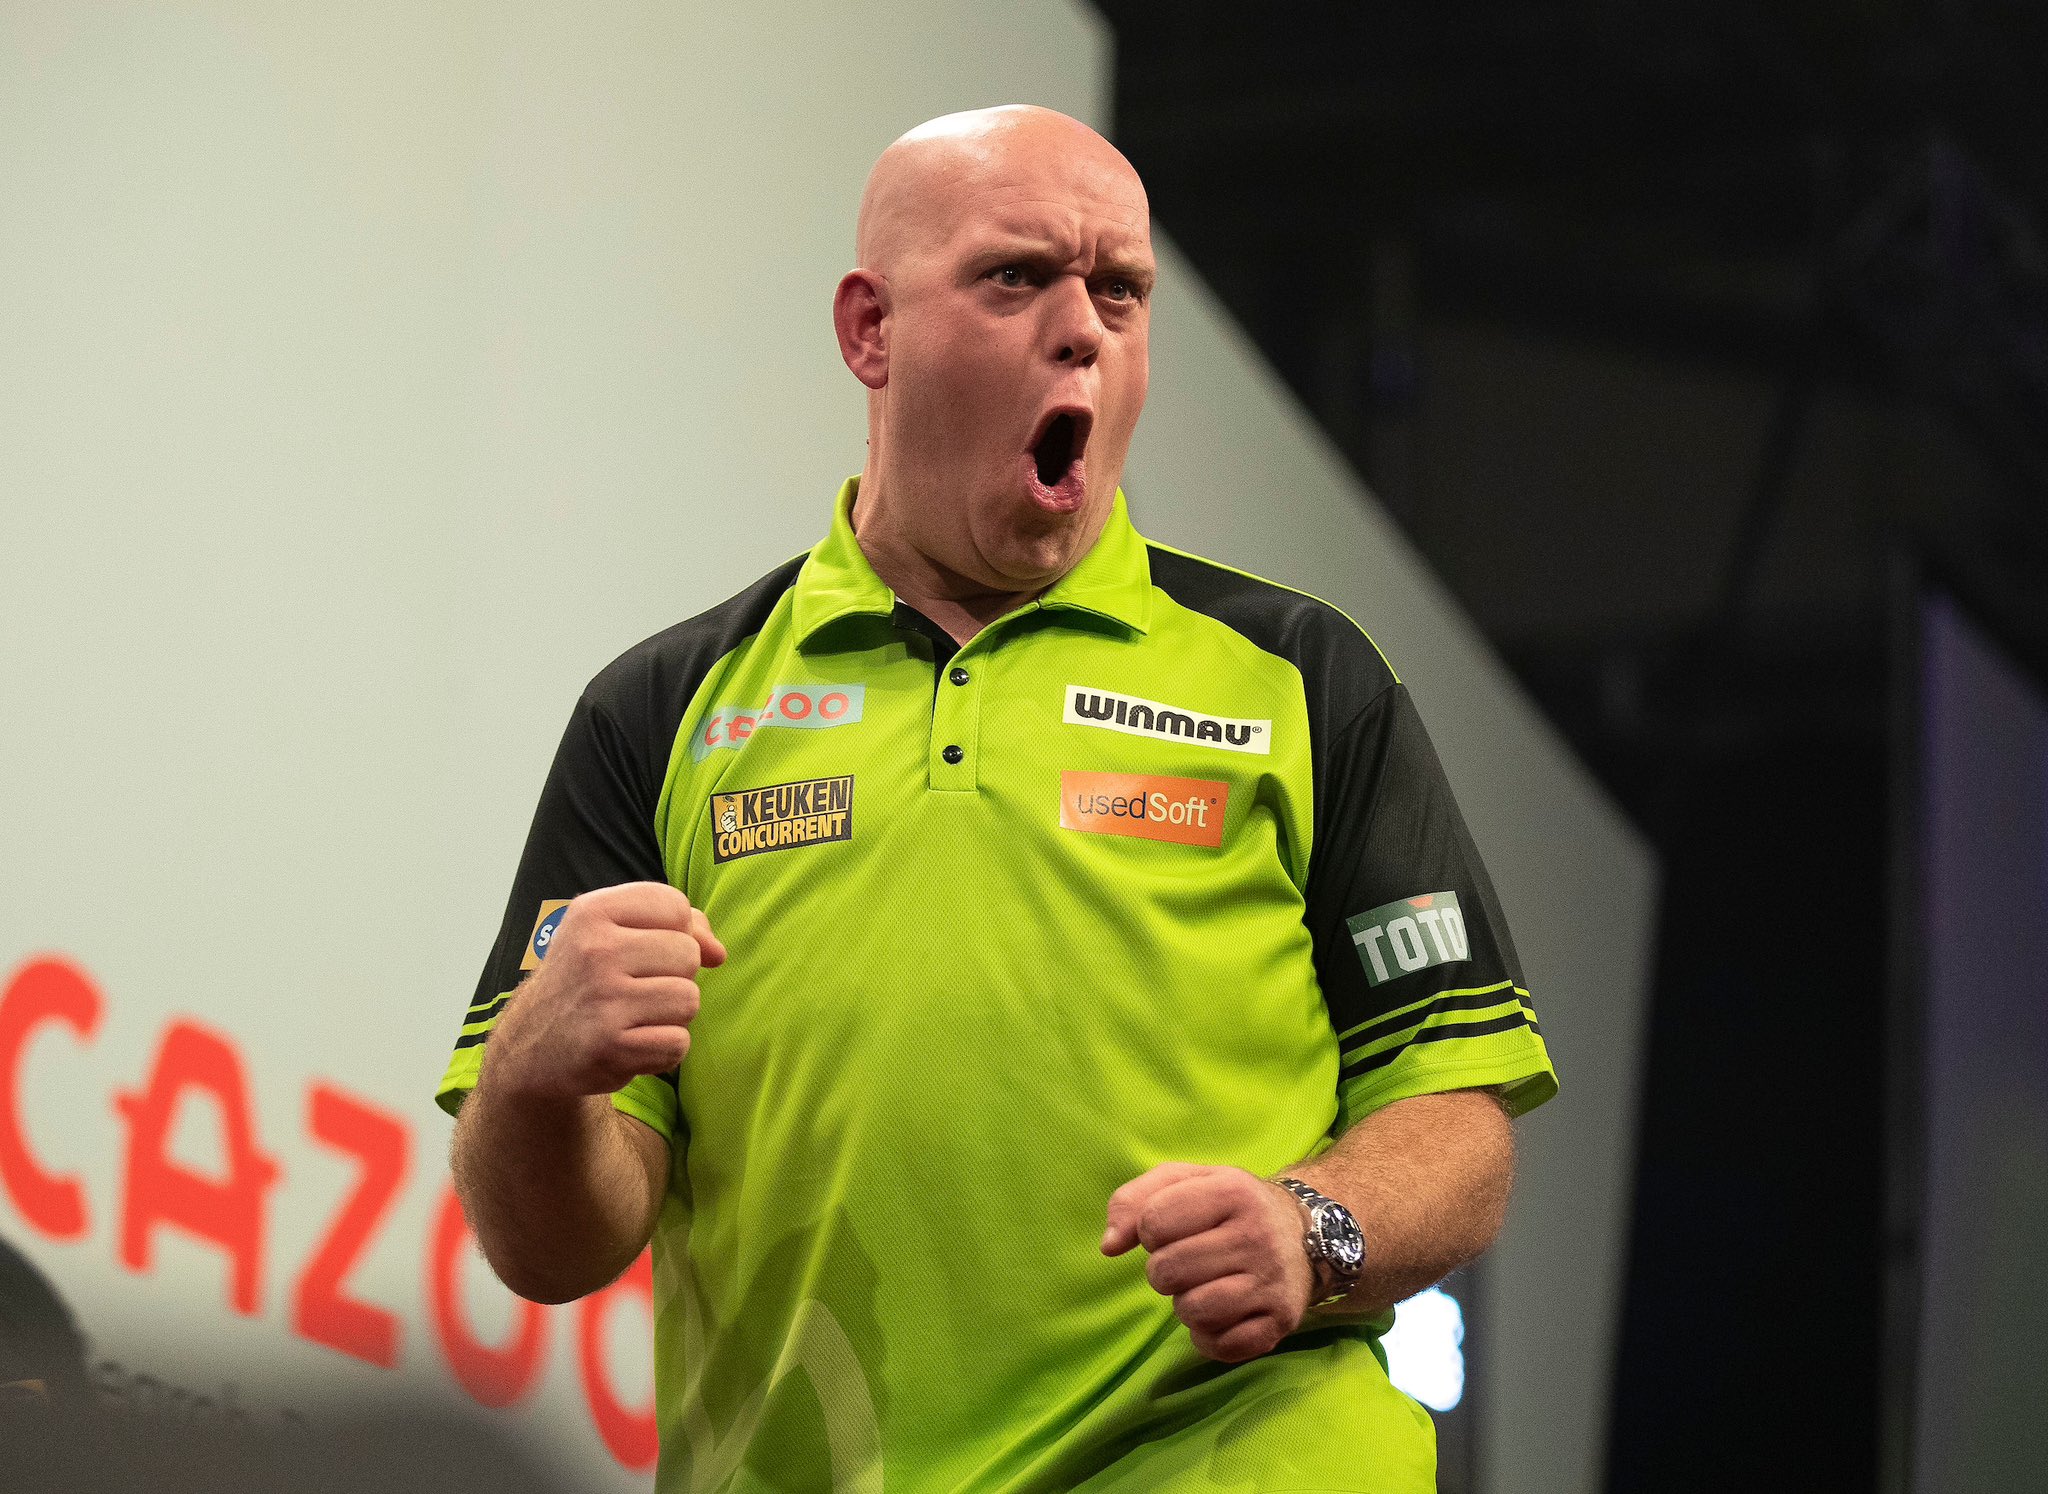 Michael Van Gerwen on Twitter: "What a phenomenal game that was, very pleased with my performance under pressure Well done to Josh as it takes two to make games like this.